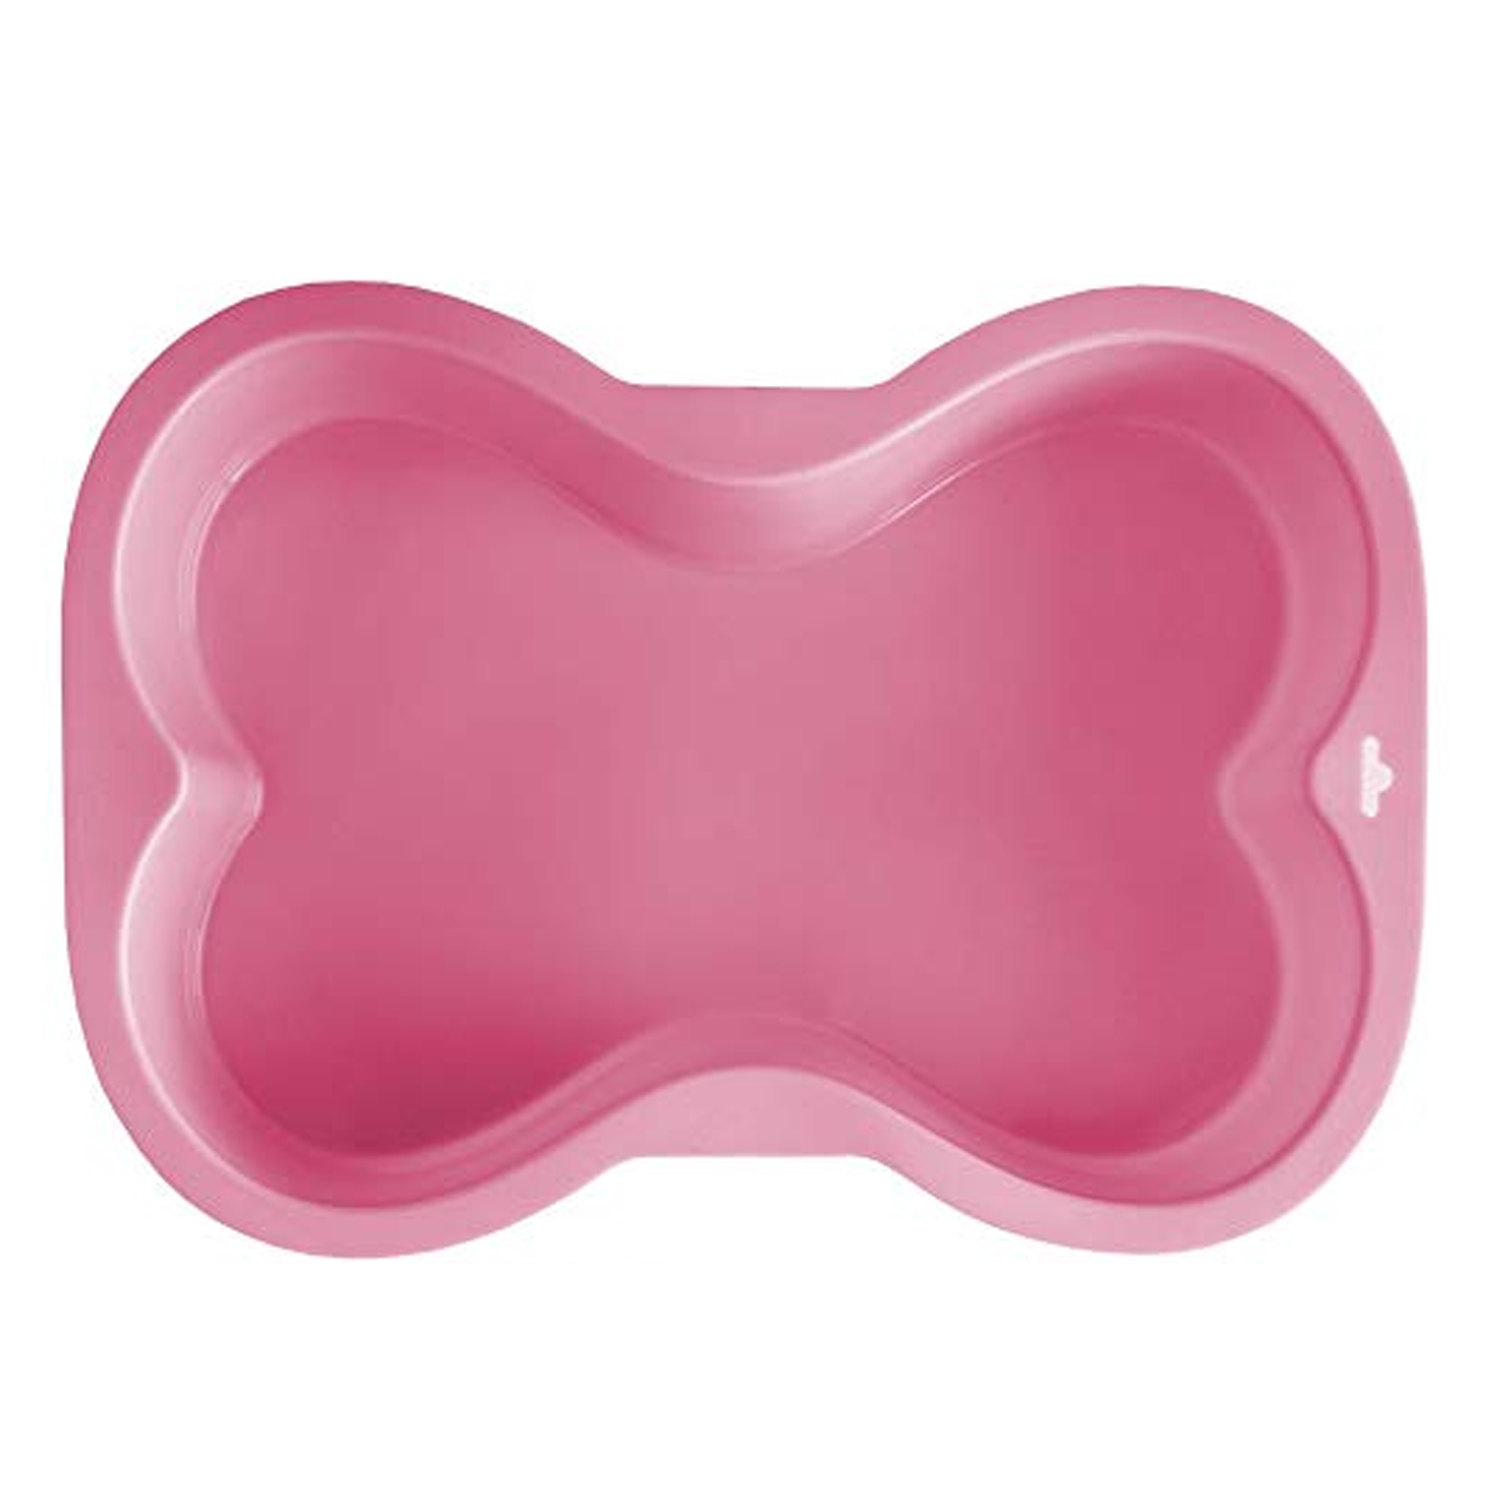 Pet Boutique - Dog Treats - Pink Silicone Bone Cake Pan for Dogs